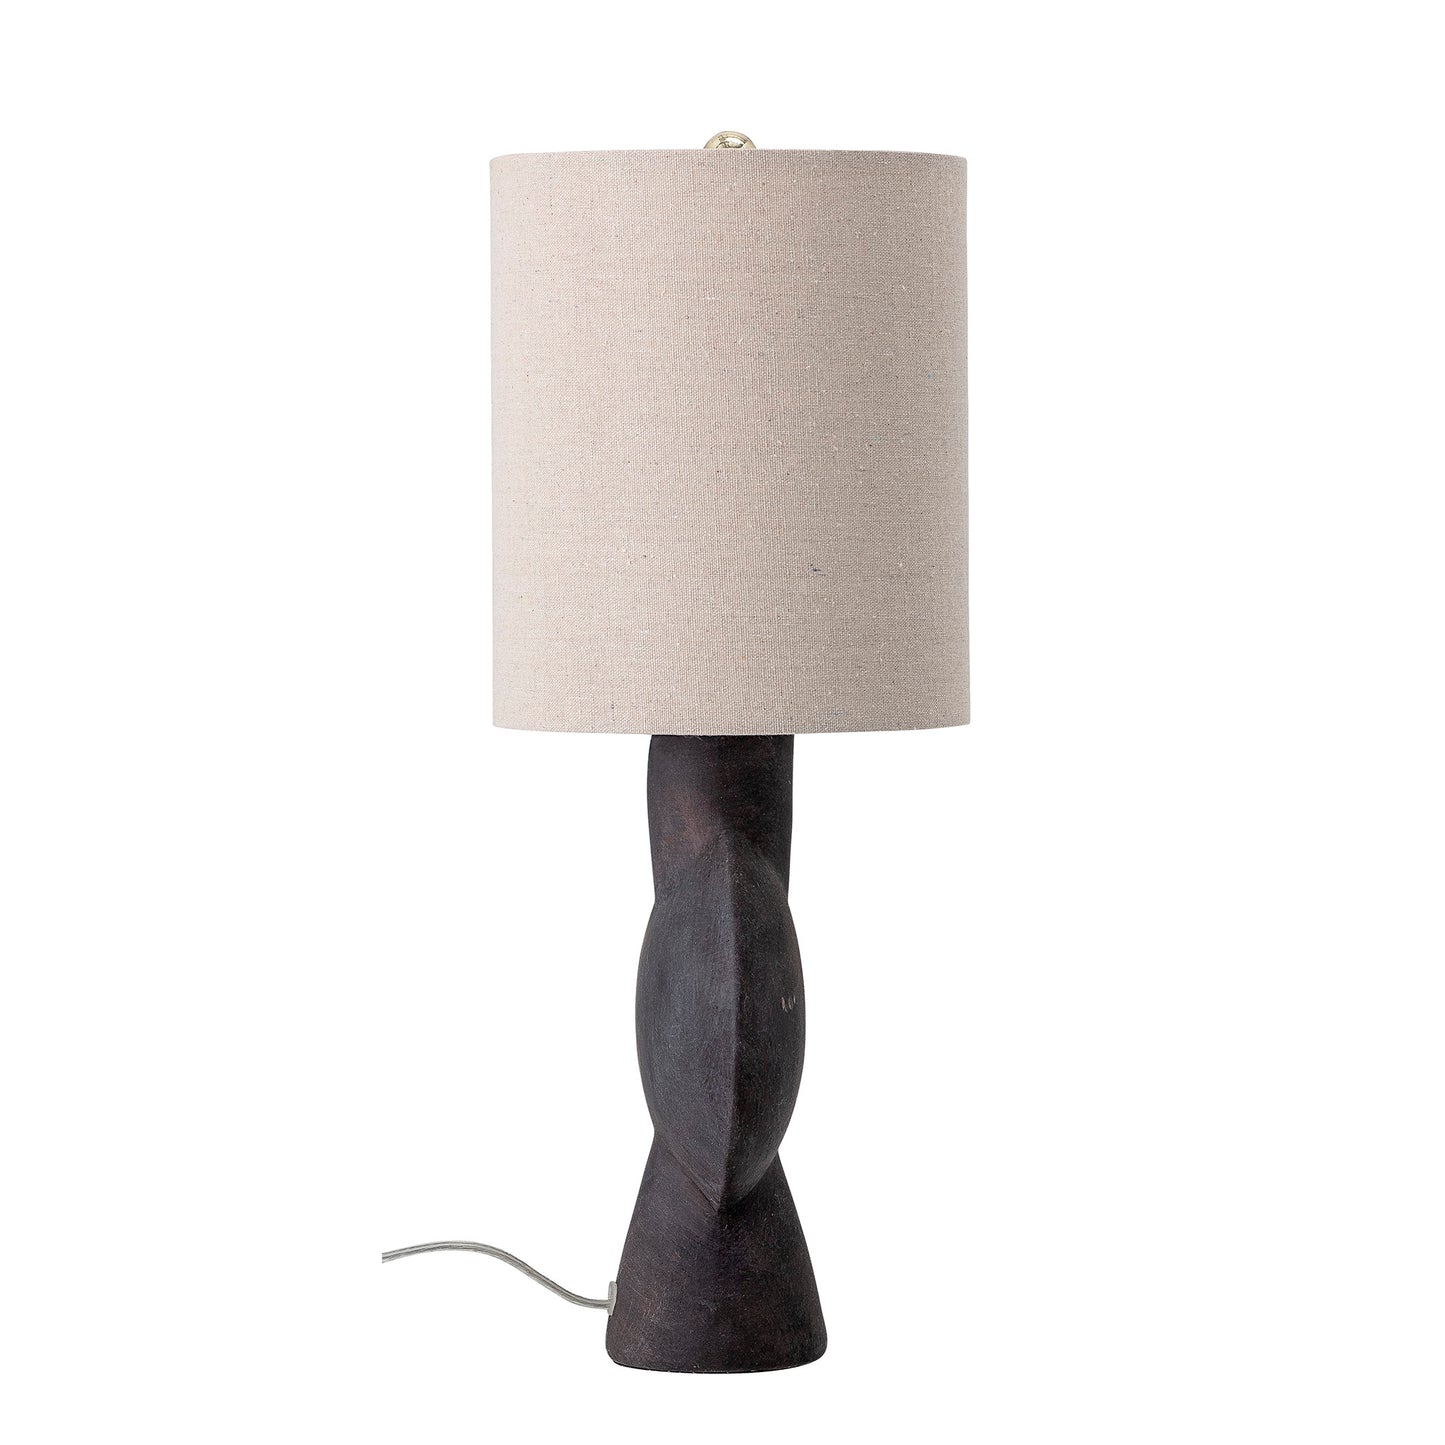 Brown Concrete Table Lamp W/ Lampshade